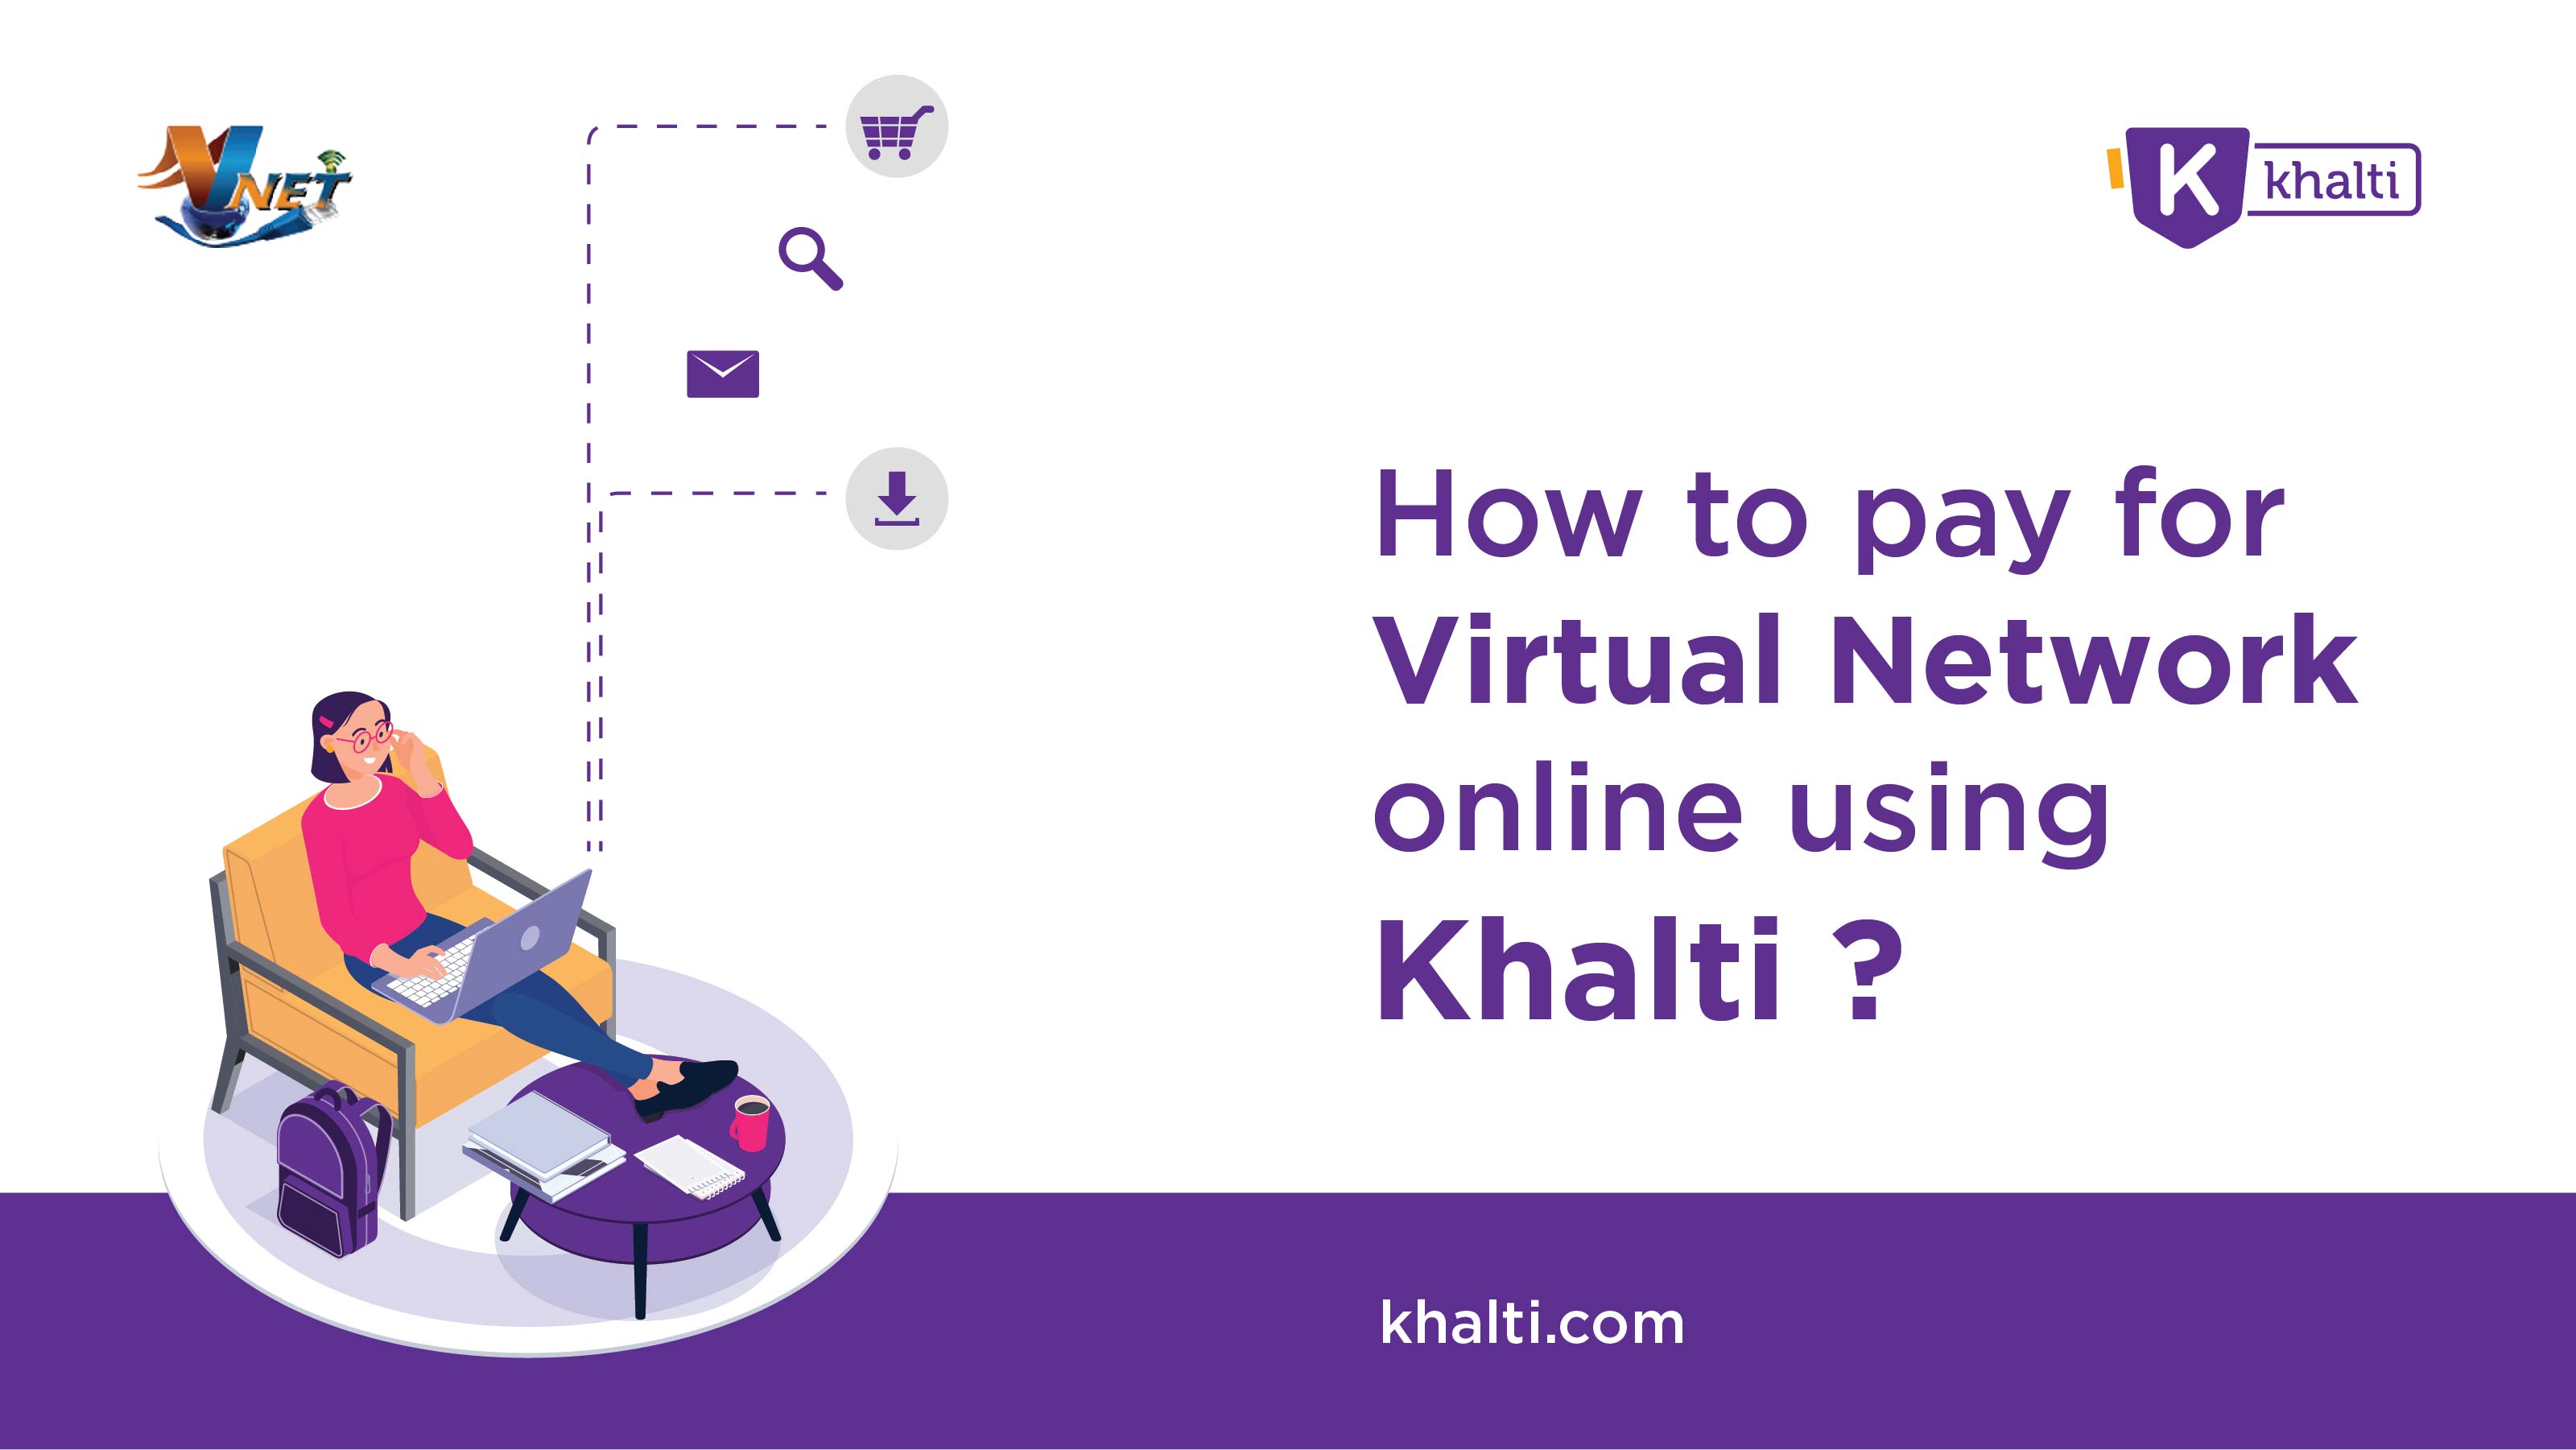 How to pay for Virtual Network online using Khalti?